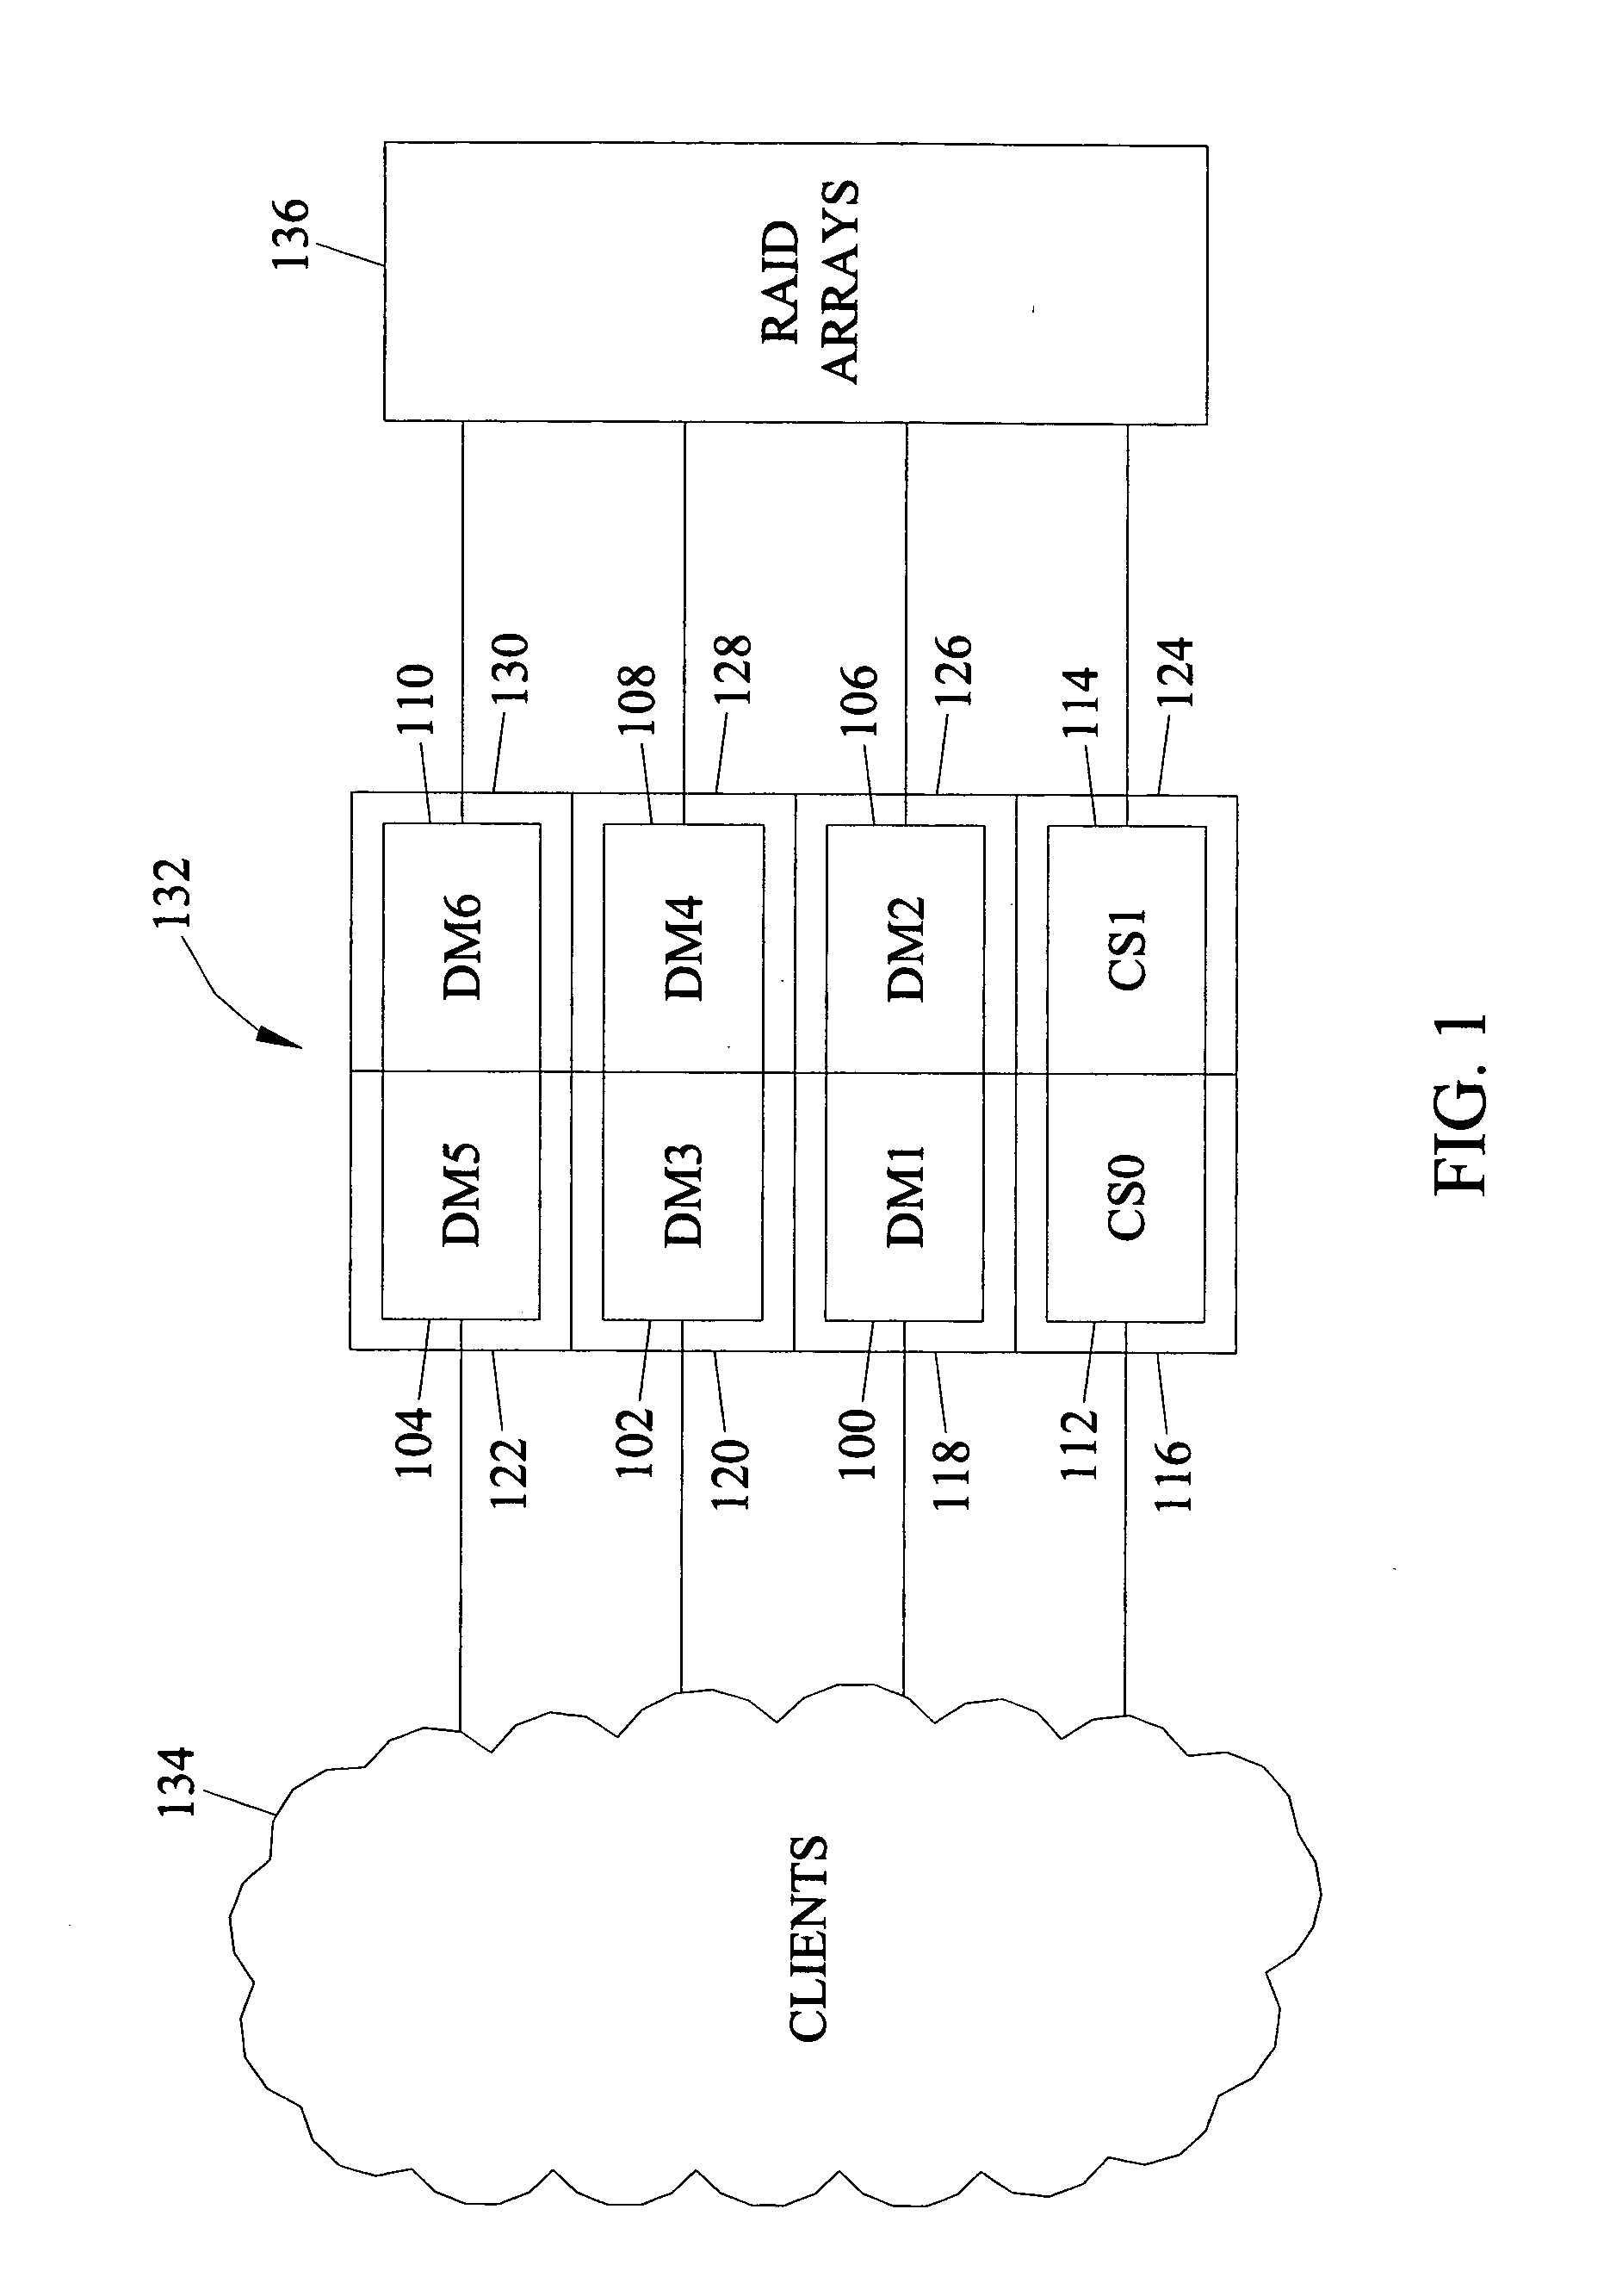 Methods, systems, and computer program products for determining locations of interconnected processing modules and for verifying consistency of interconnect wiring of processing modules